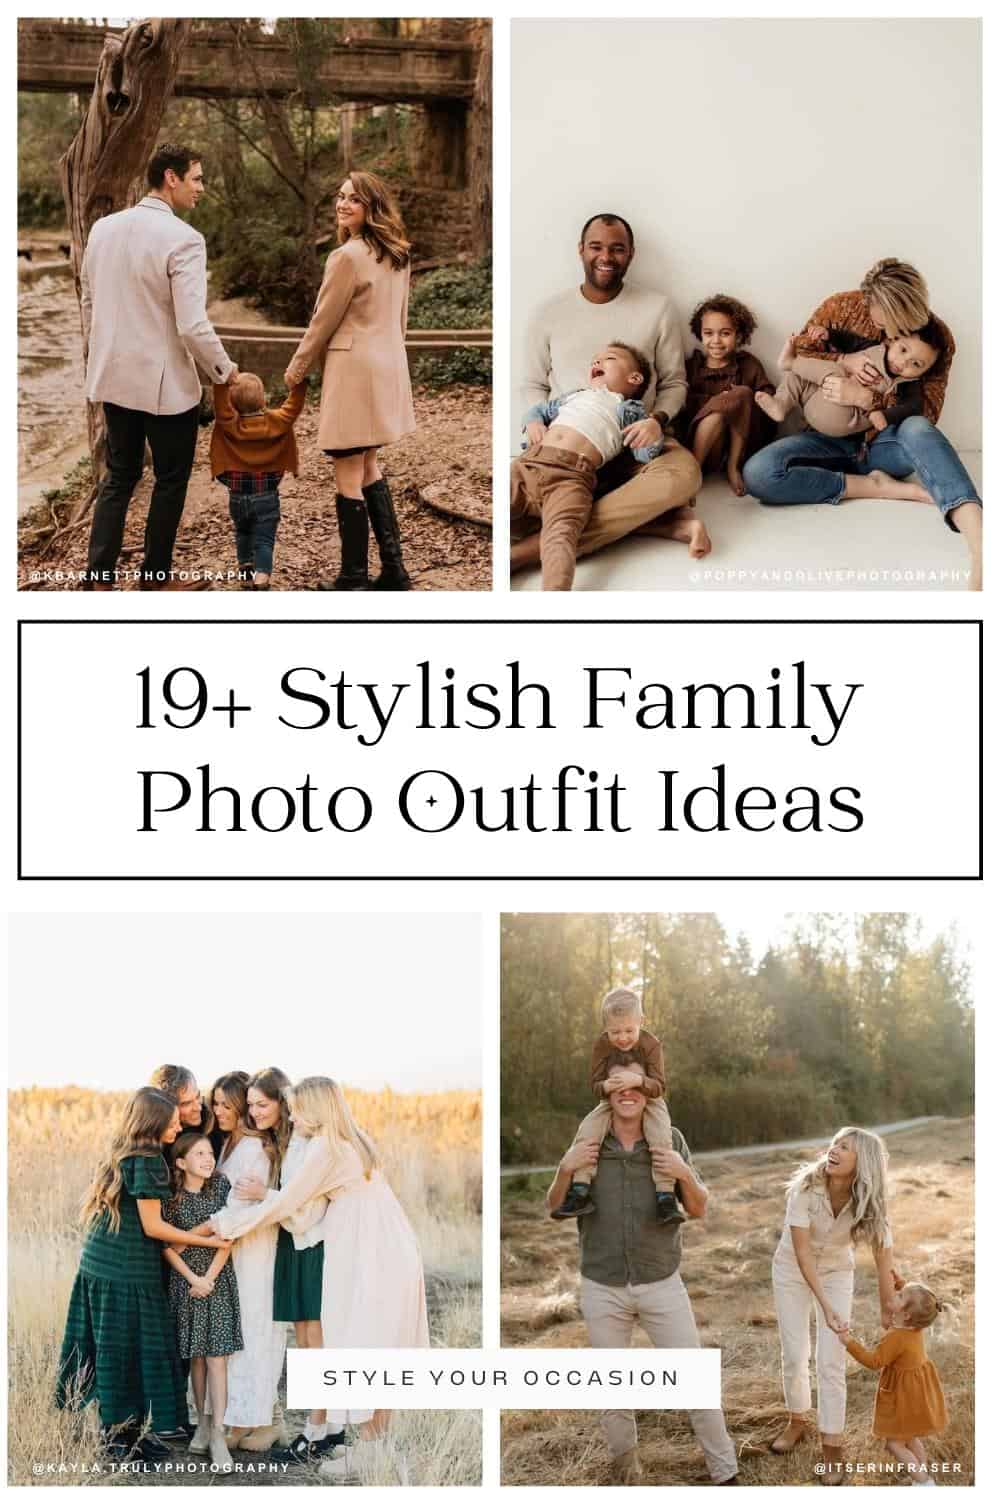 collage of four family photoshoots with different outfit ideas